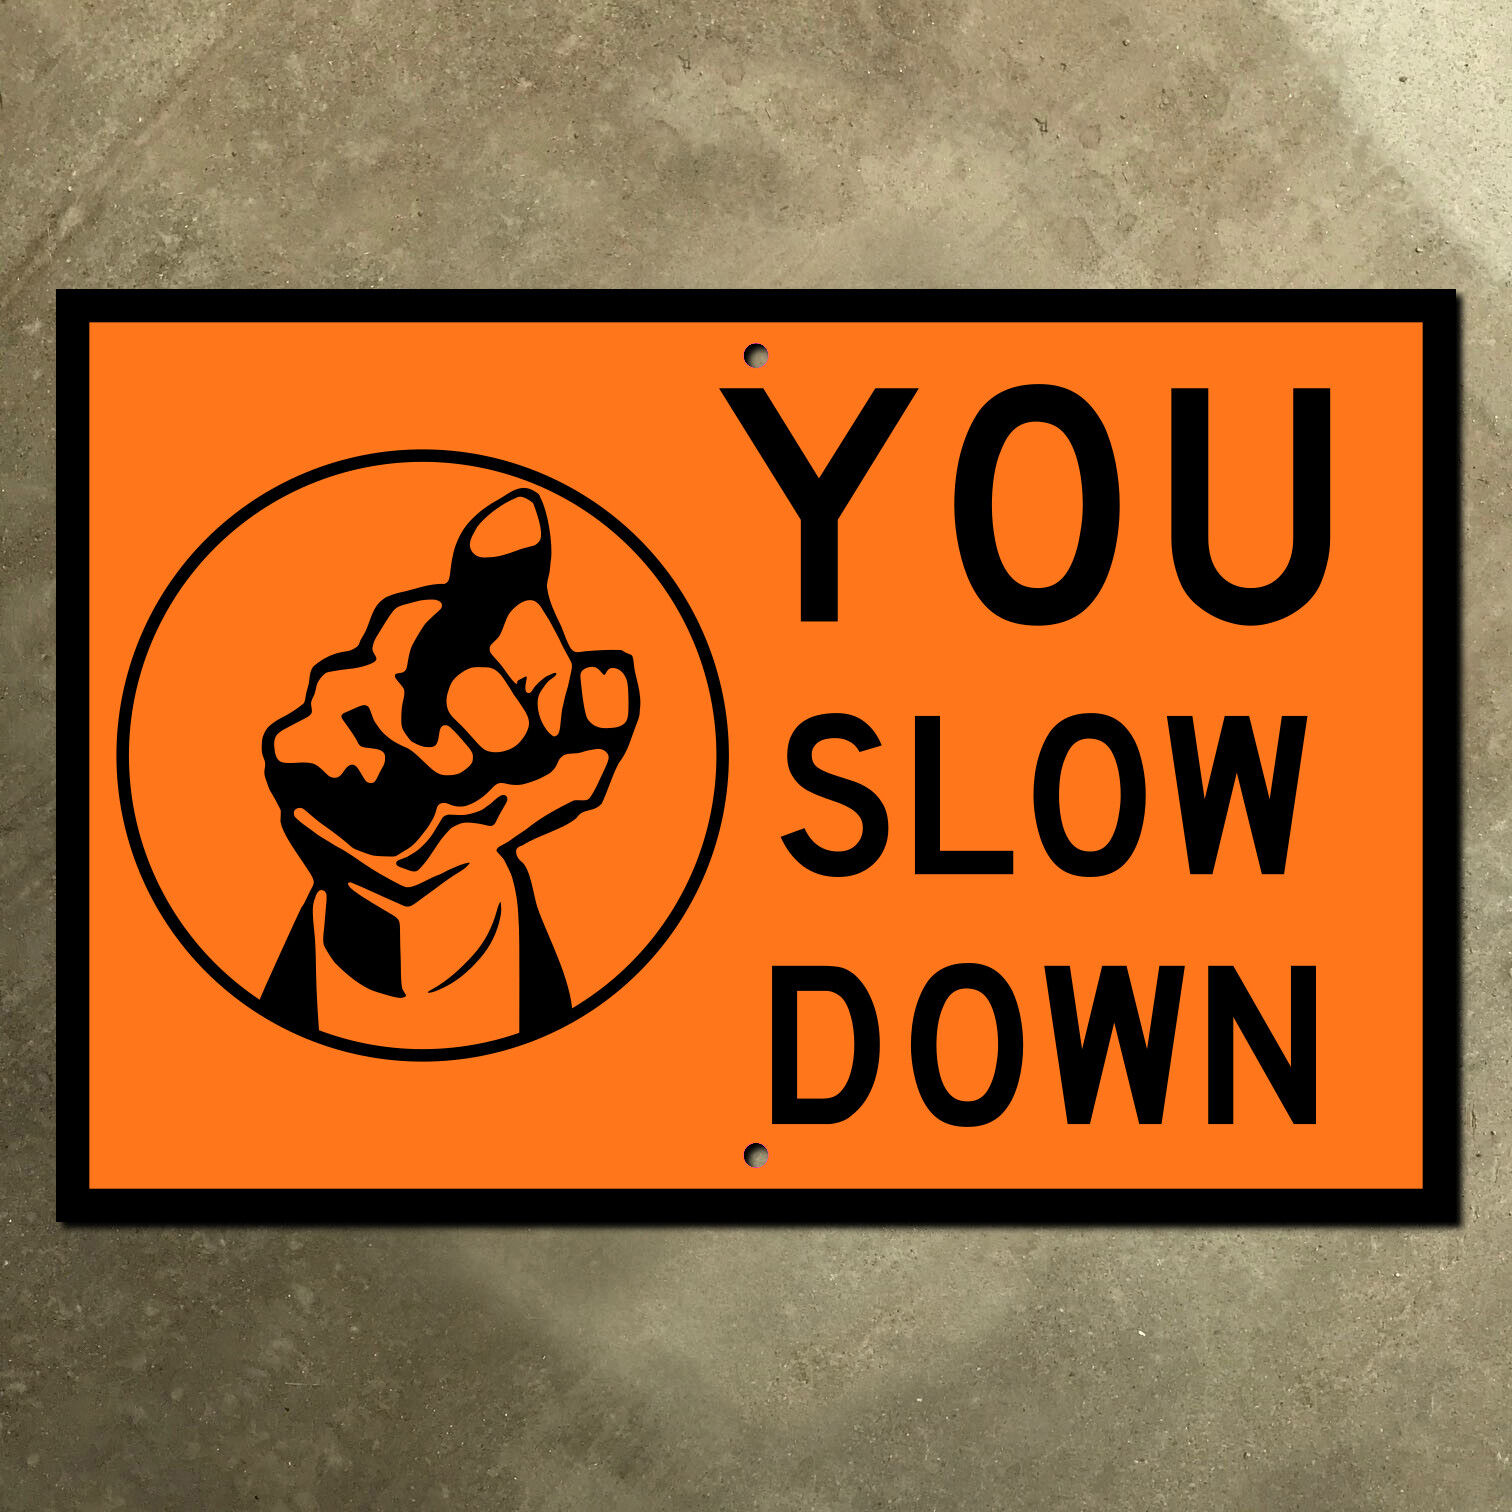 Pennsylvania Turnpike YOU SLOW DOWN highway road construction sign 1980s 21x14